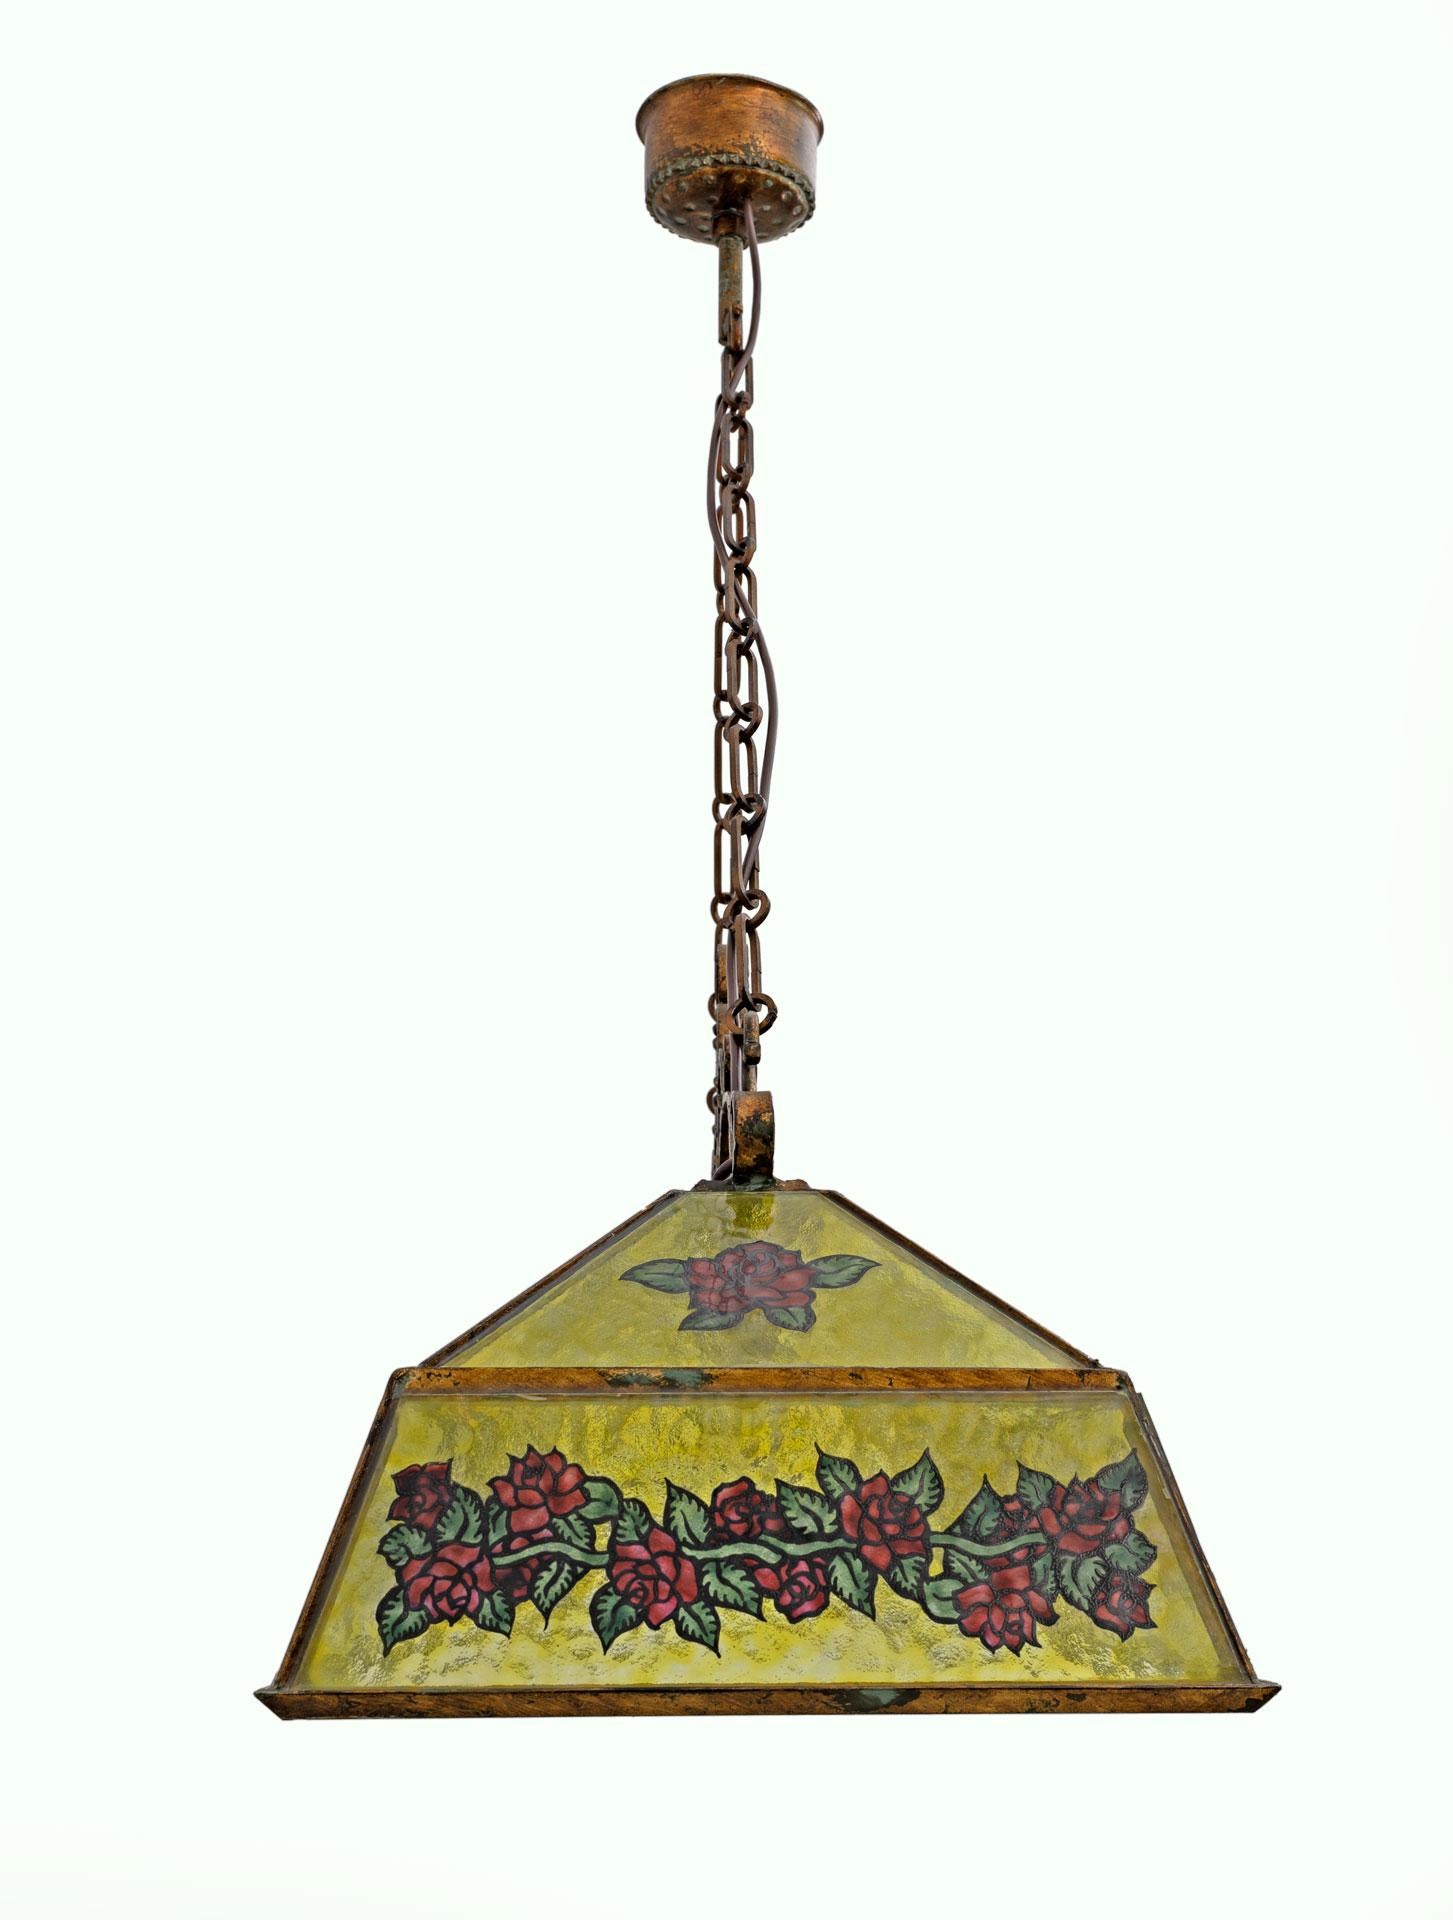 Rustic Hand-Painted Wrought Iron and Glass Pendant Chandelier, 1960s For Sale 2